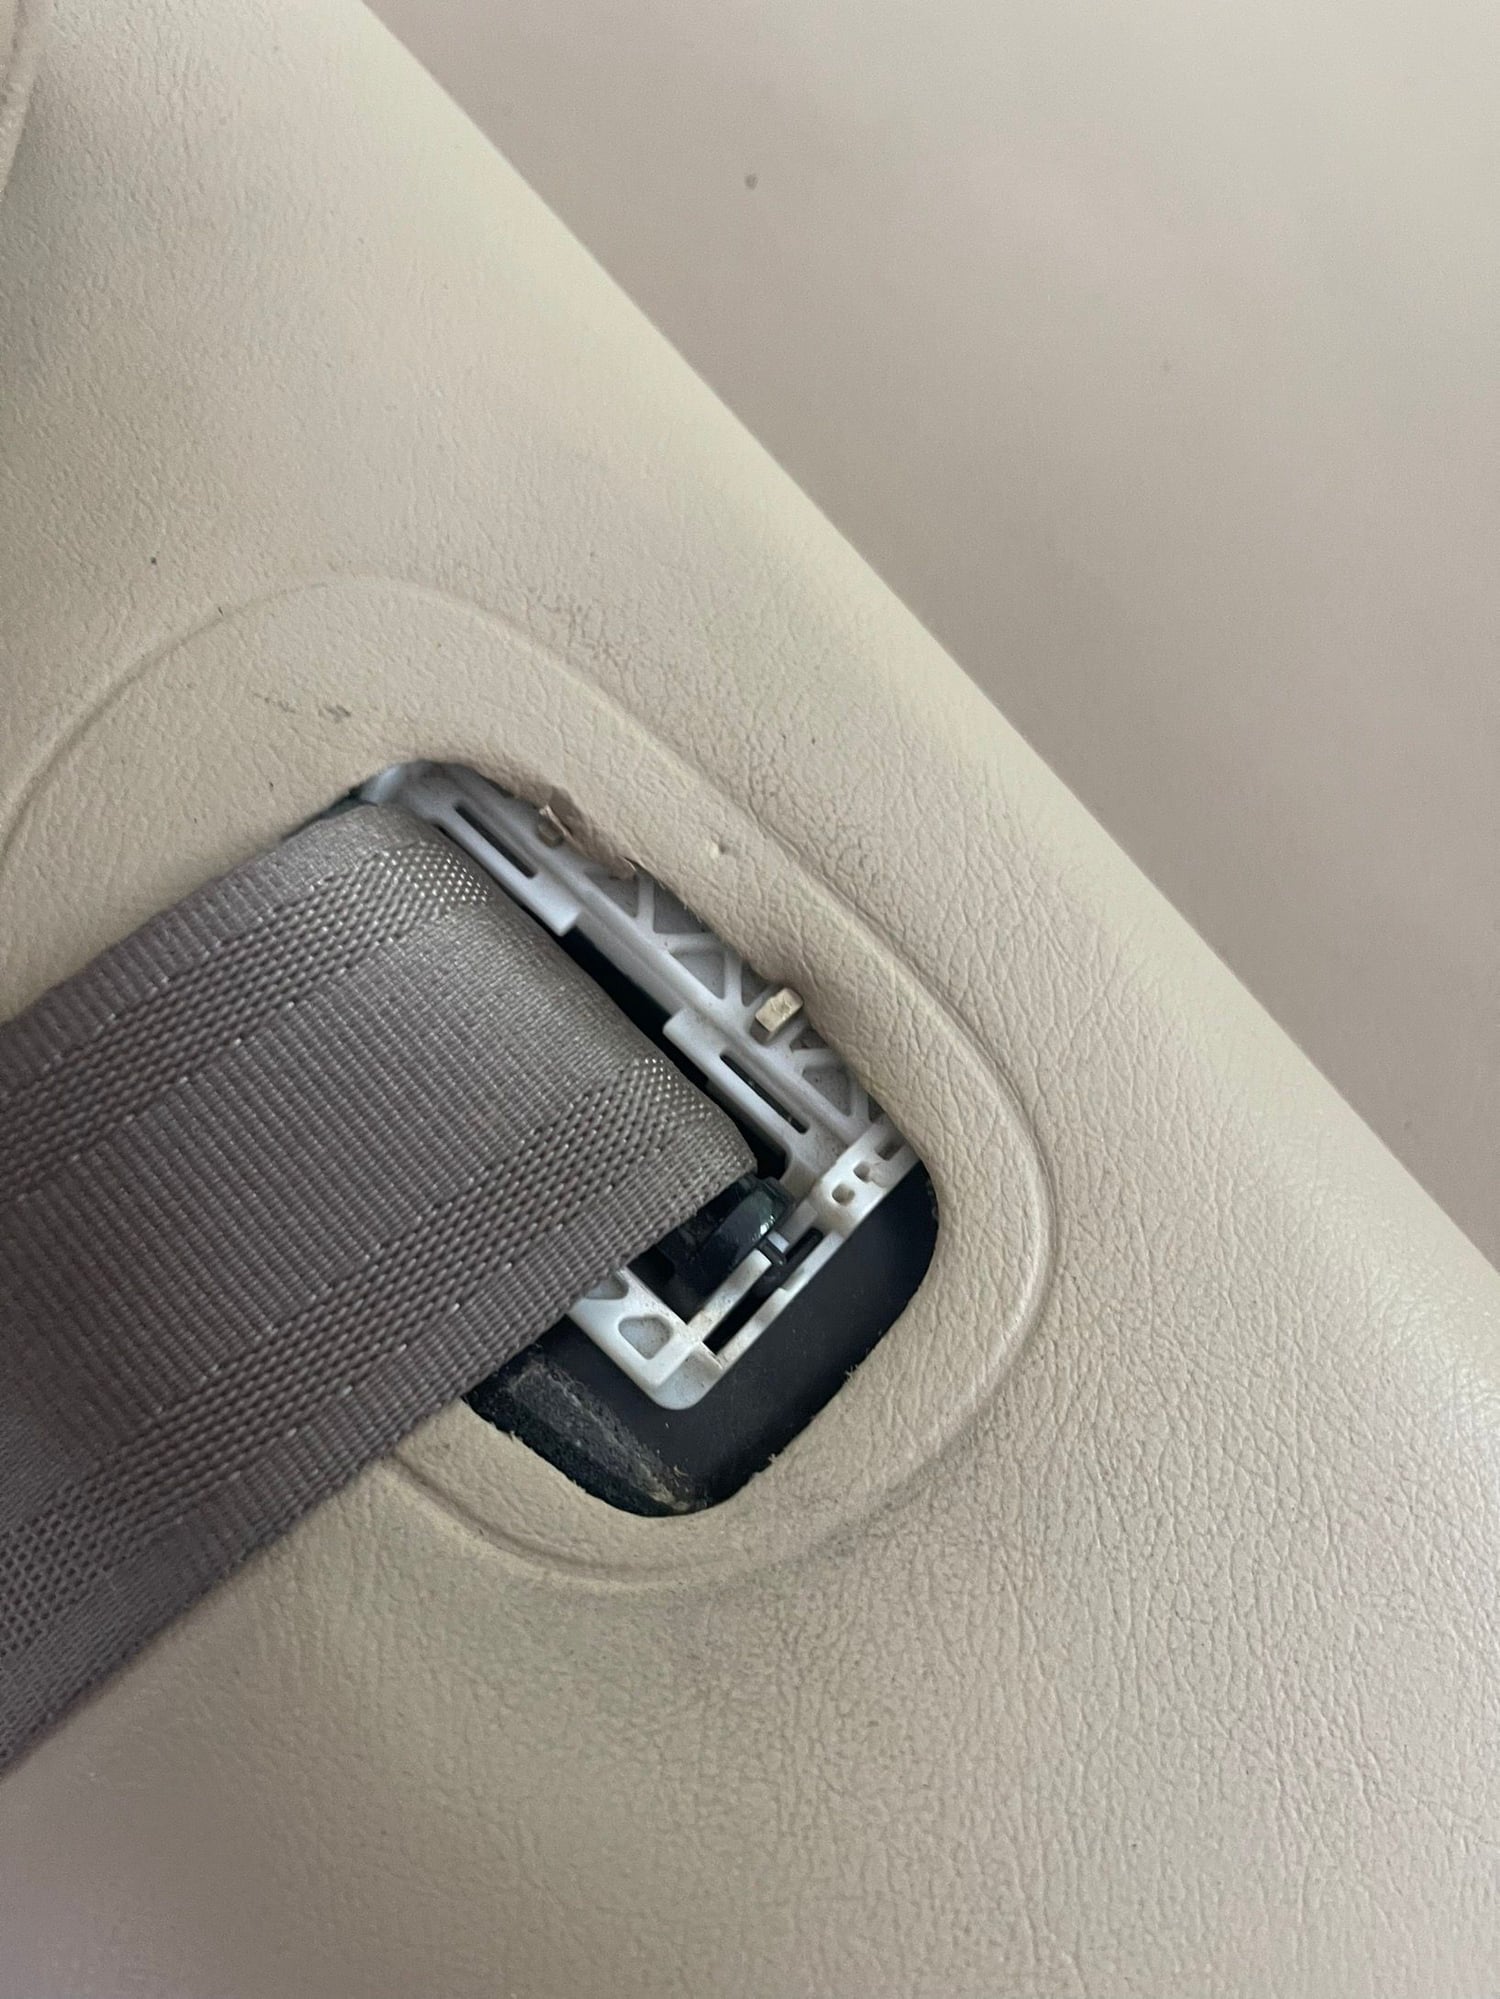 Interior/Upholstery - Seatbelt trim - New or Used - 1998 to 2003 Jaguar XJR - Raleigh, NC 27613, United States